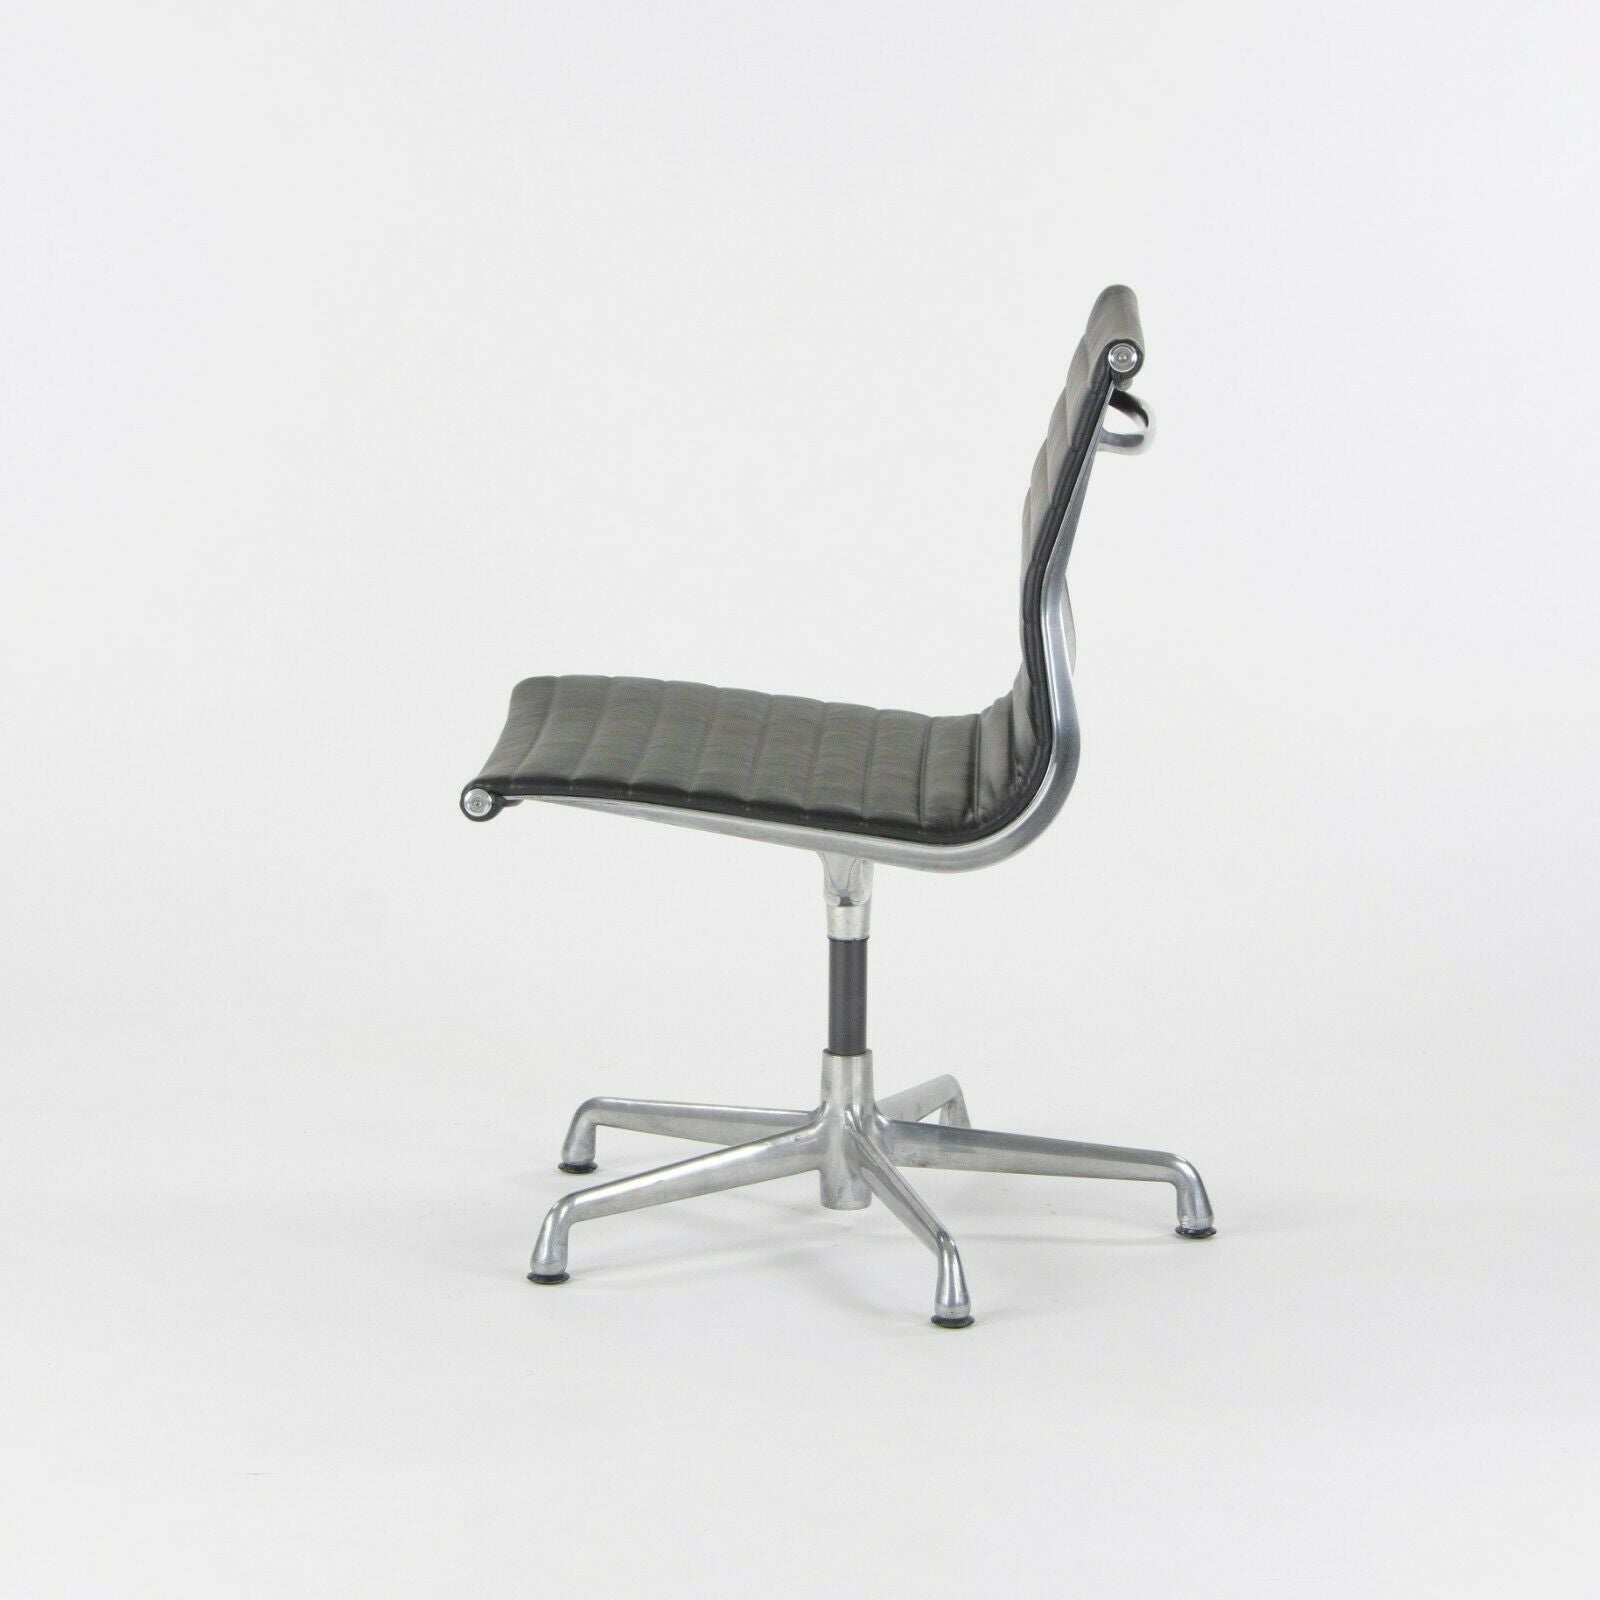 SOLD Herman Miller Eames Aluminum Group Management Armless Side / Desk Chair Black 4x Available